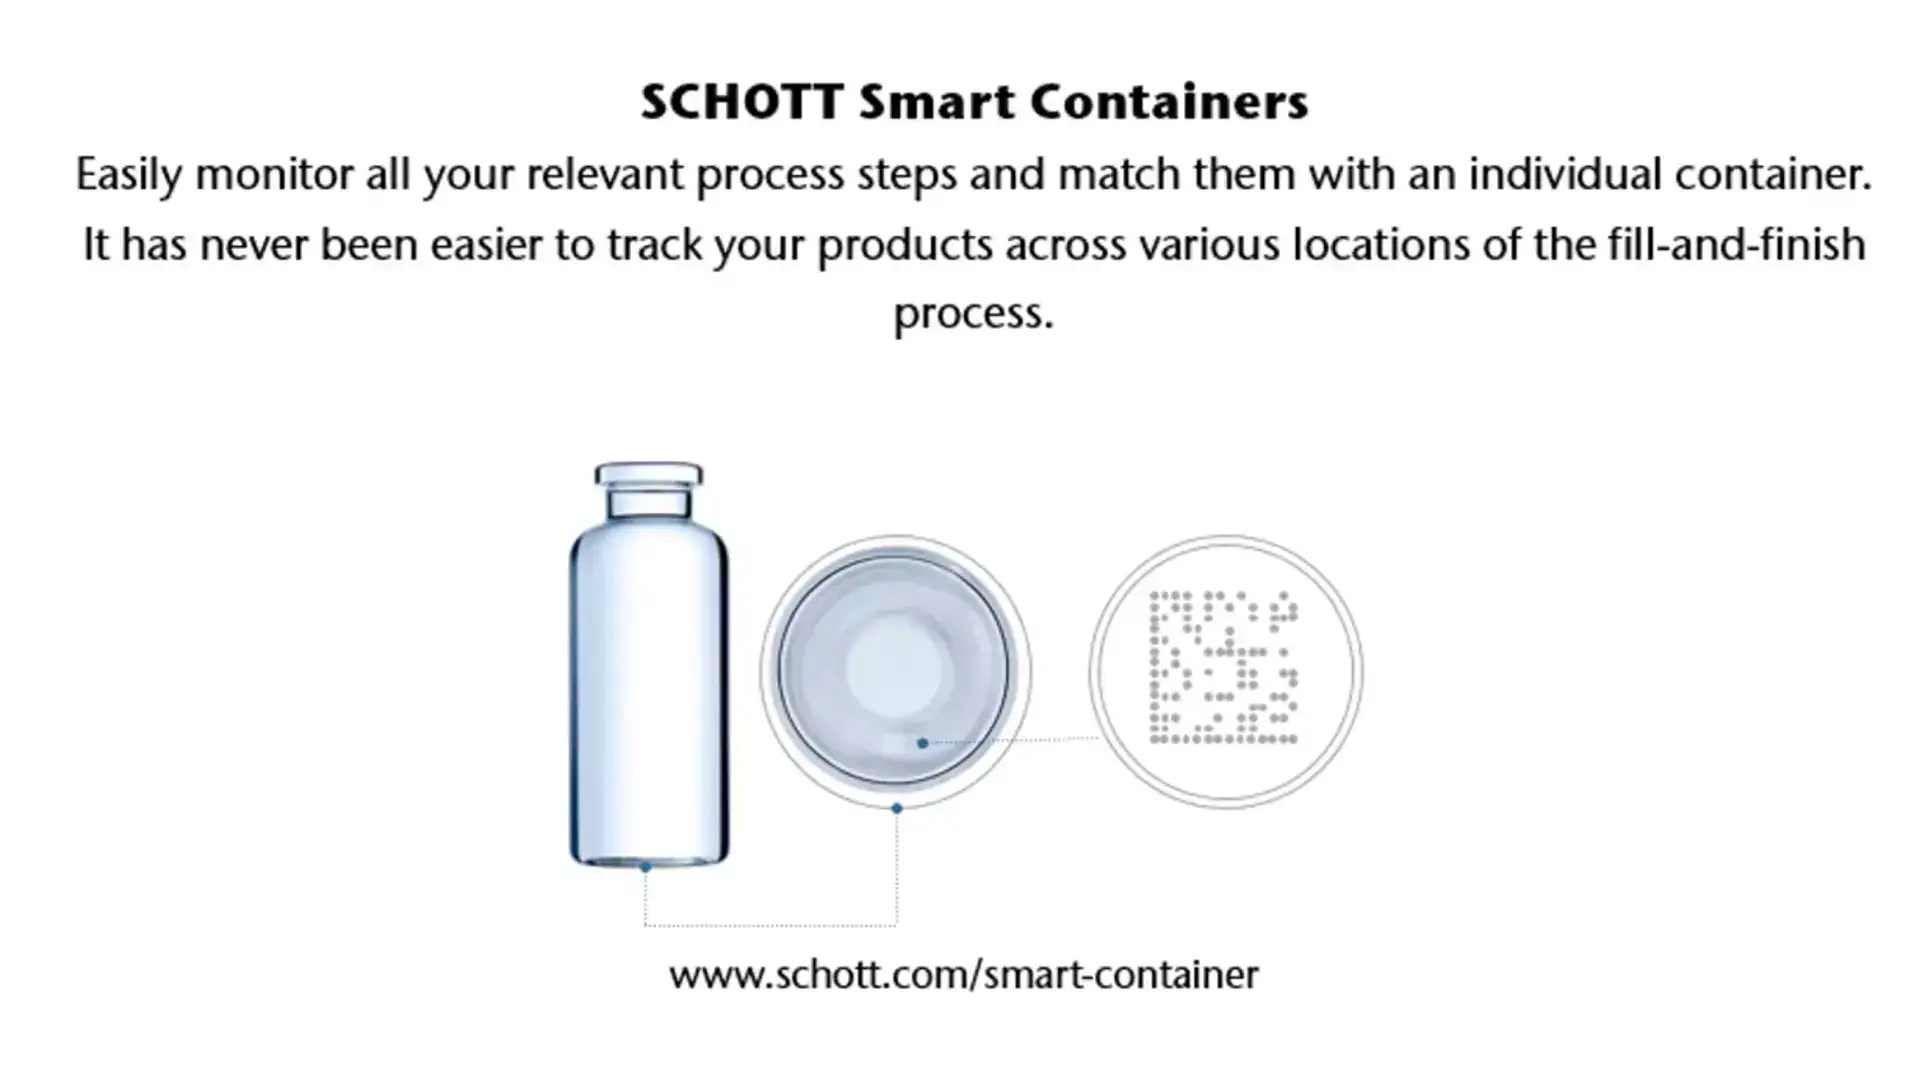 Video showing how SCHOTT Smart Containers reduce the risk of mix-ups